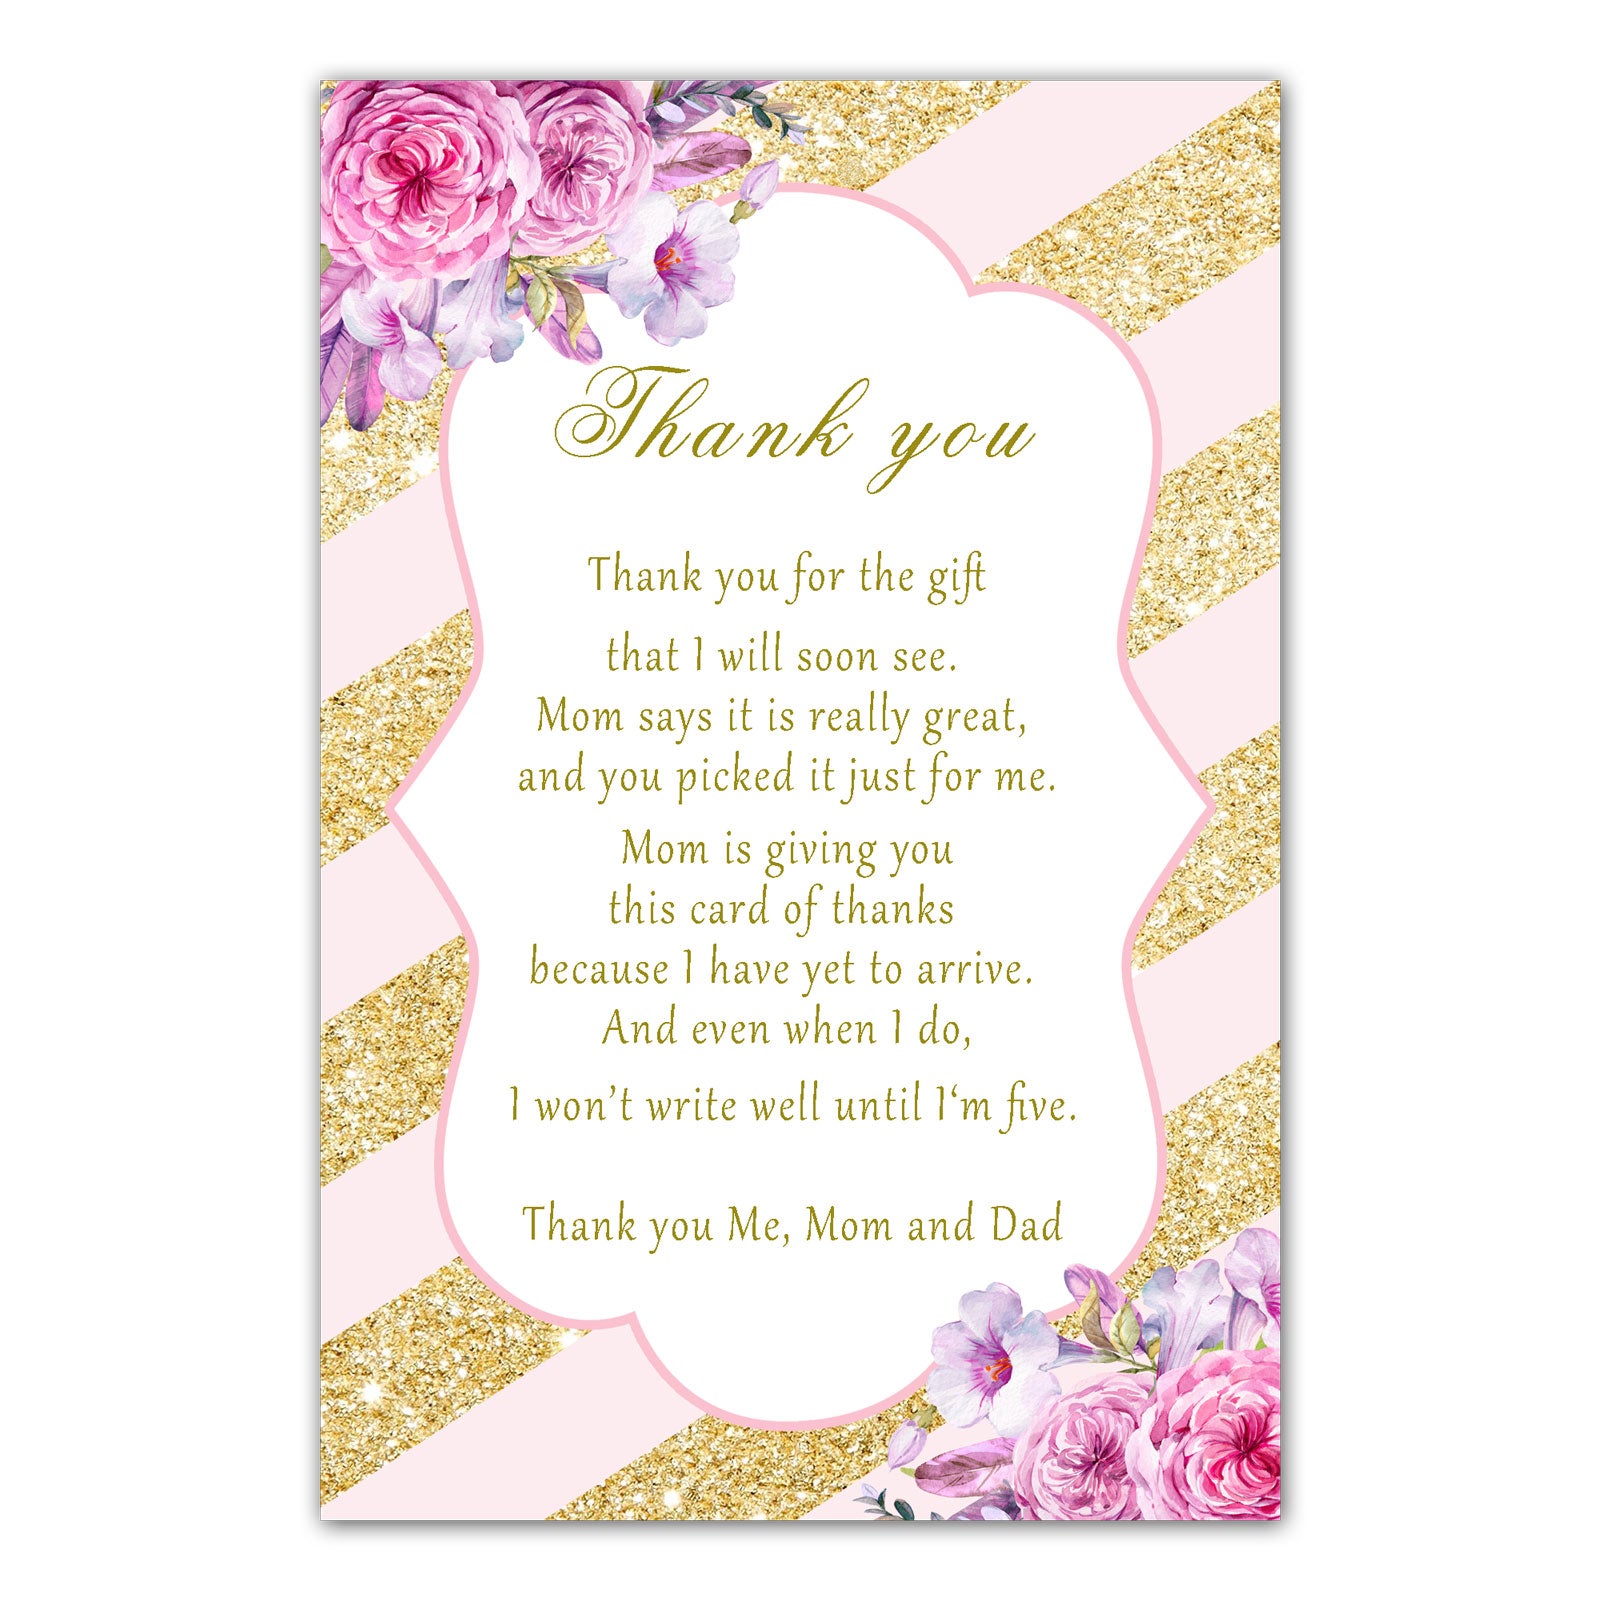 30 thank you cards blush pink gold floral baby shower girl